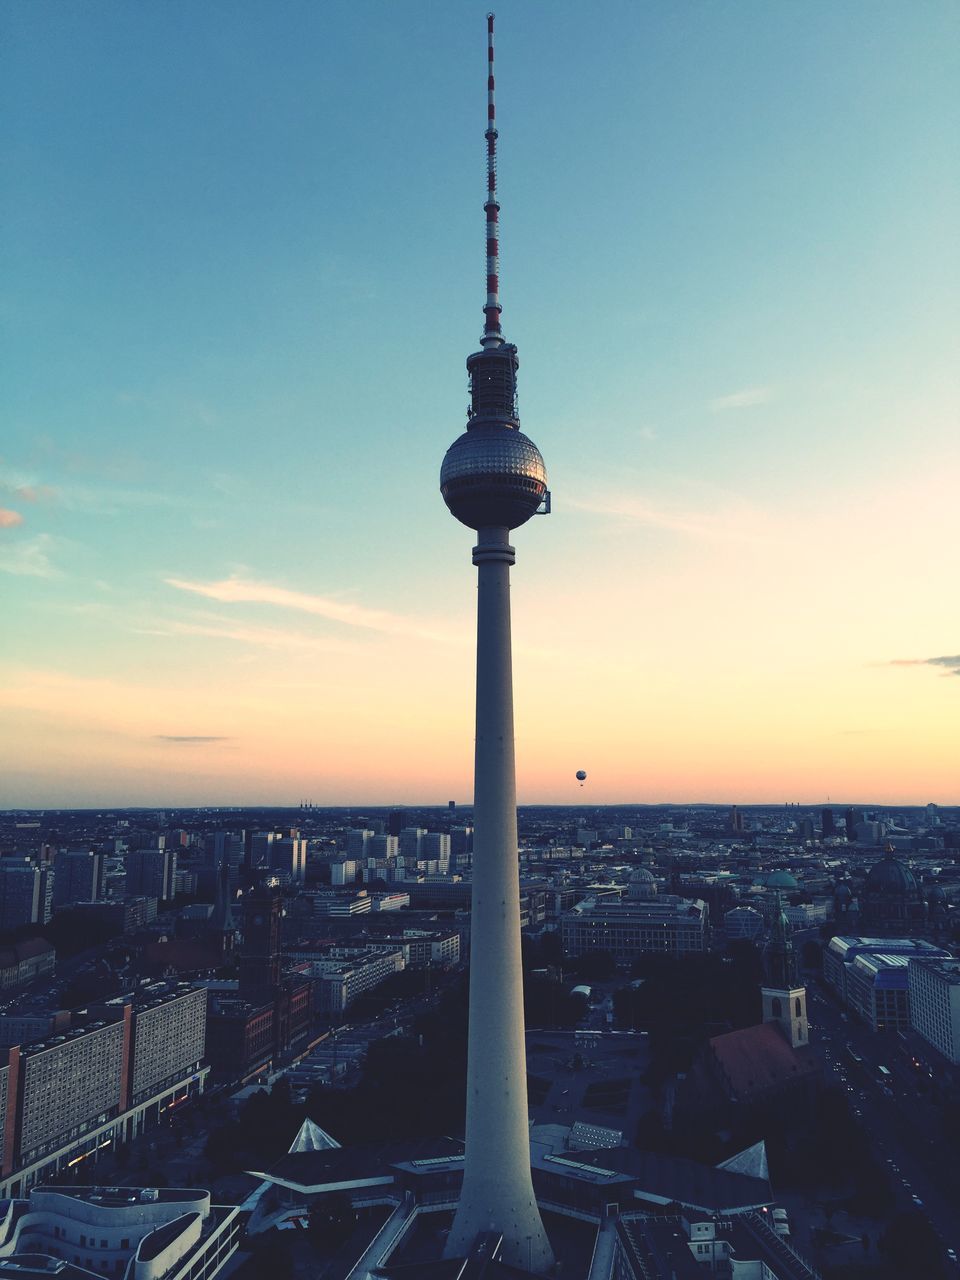 tower, architecture, building exterior, built structure, tall - high, city, communications tower, cityscape, sunset, capital cities, international landmark, travel destinations, famous place, tourism, sky, spire, television tower, travel, skyscraper, communication